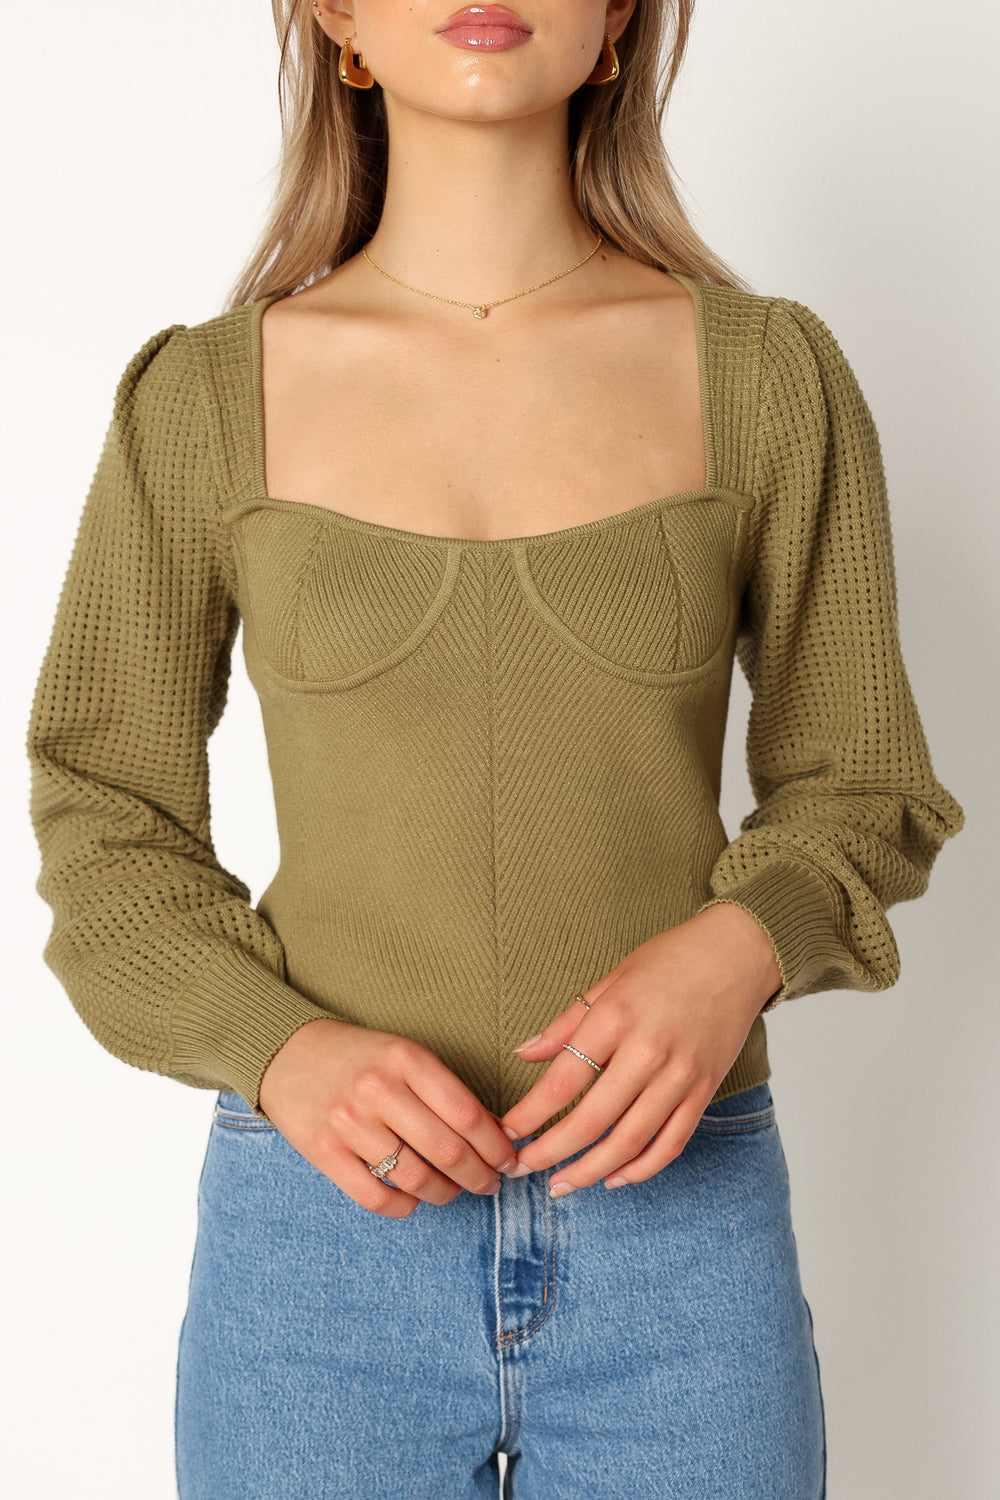 Petal and Pup USA KNITWEAR Madalyn Knit Sweater - Olive